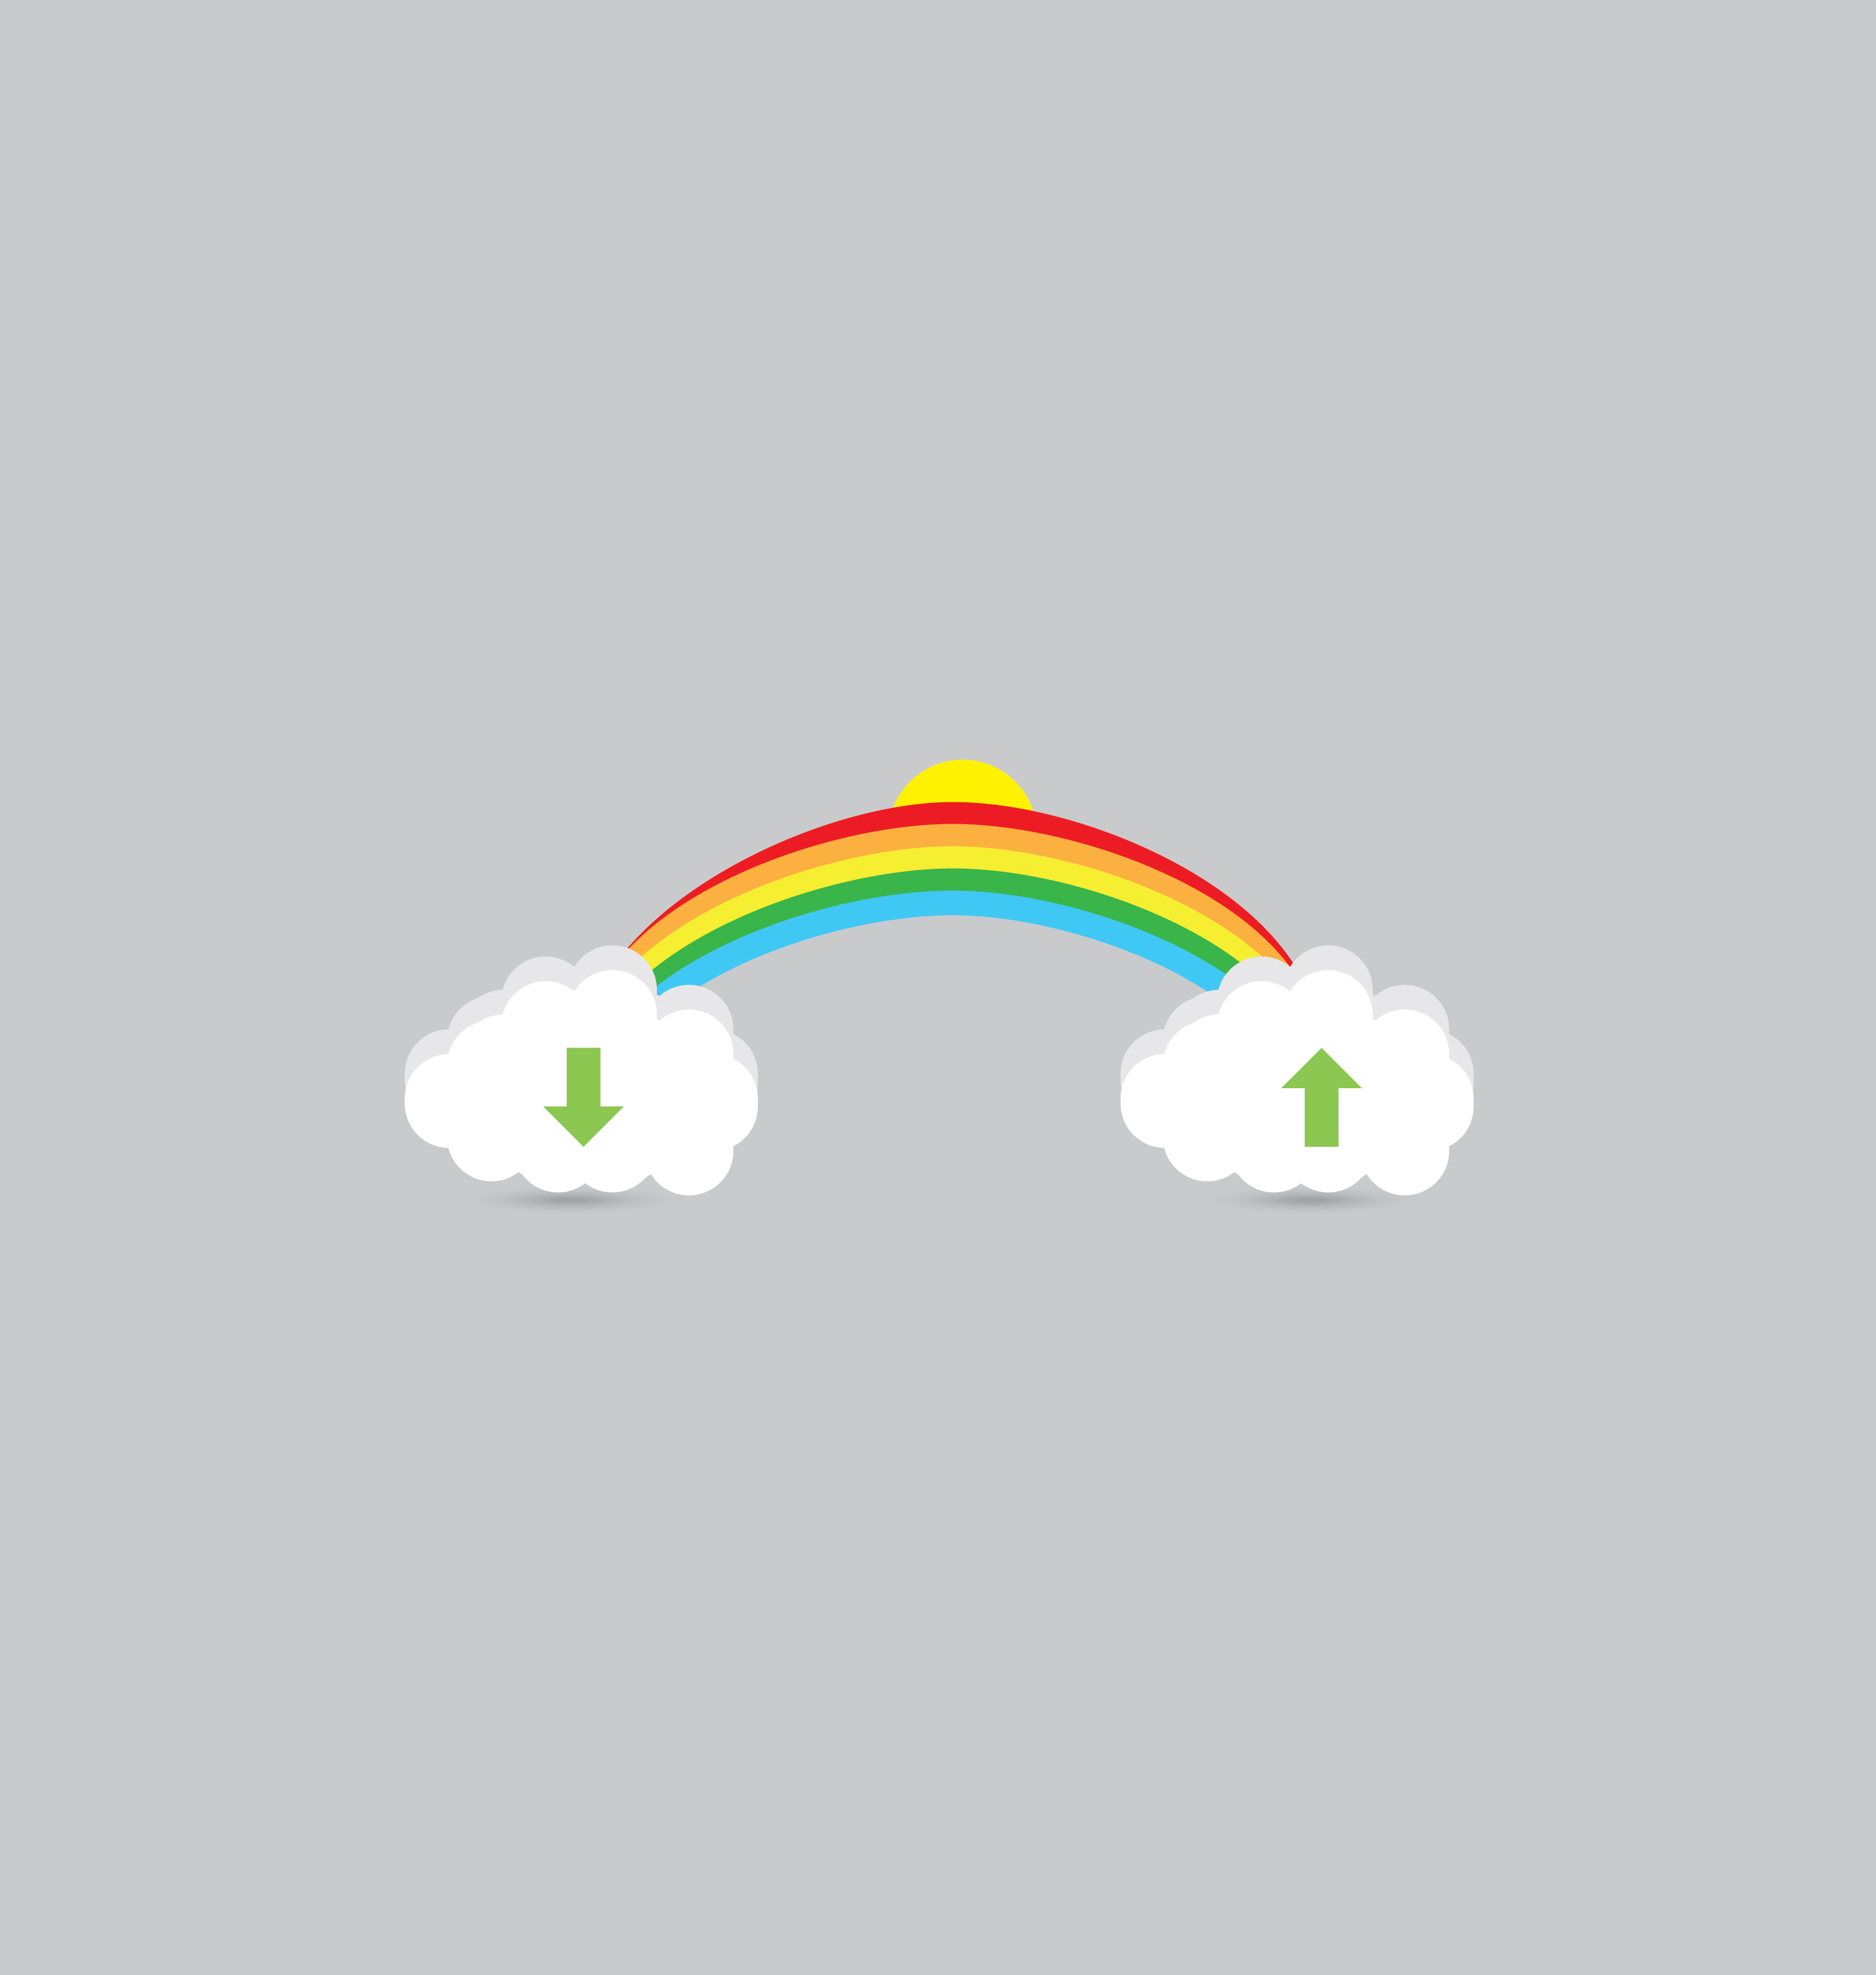 Cloud download and upload icon 13